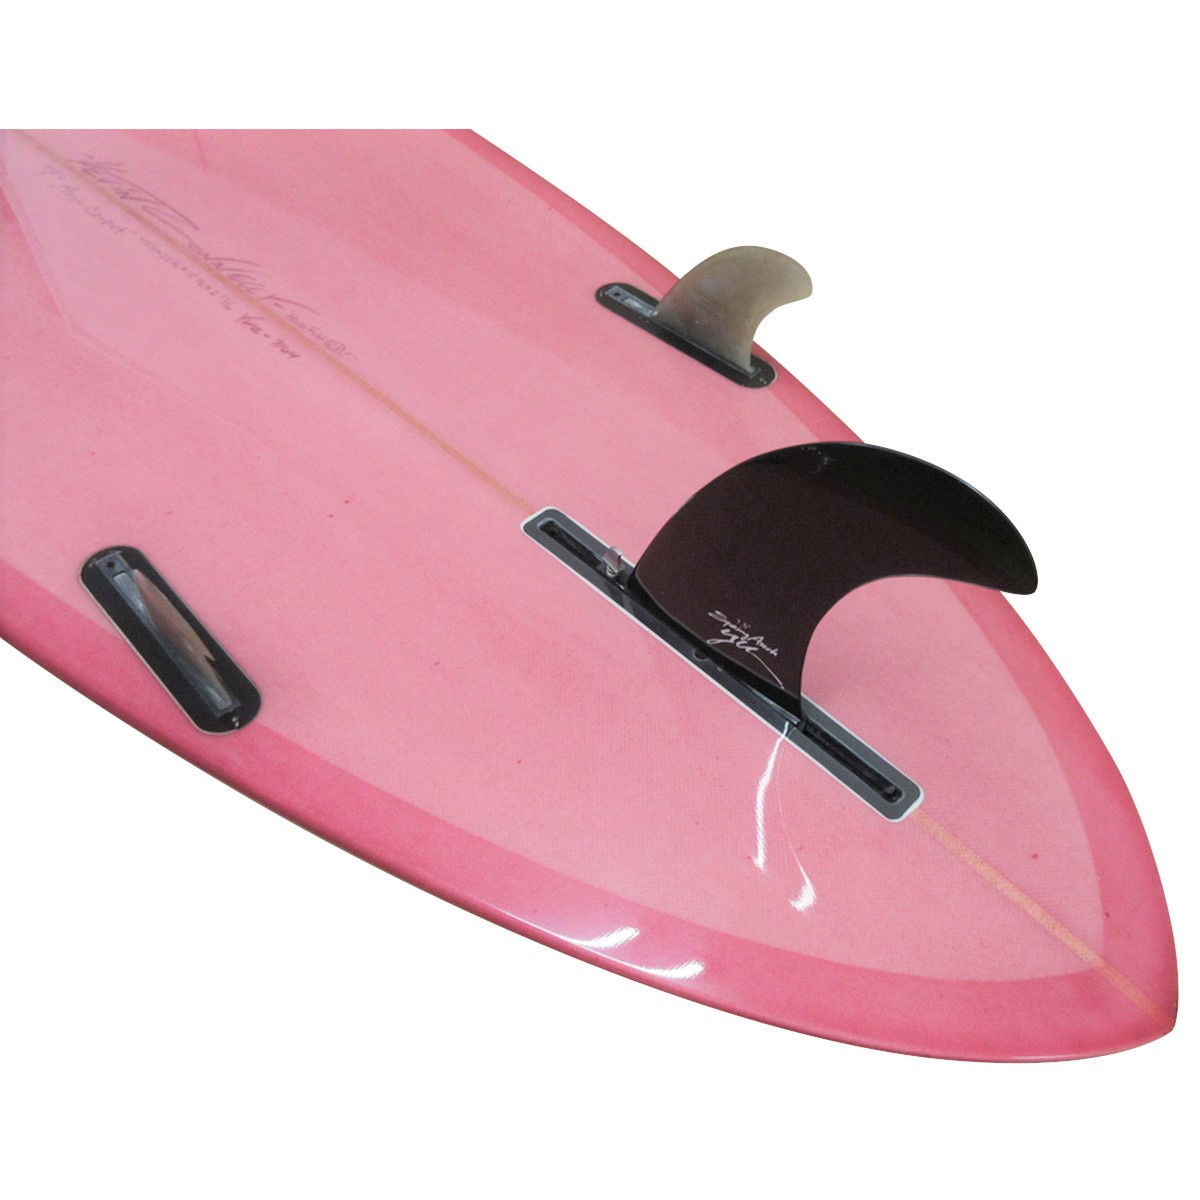 YU Surf Classic / Magic Carpet 7`6 Shaped By Kevin Connelly